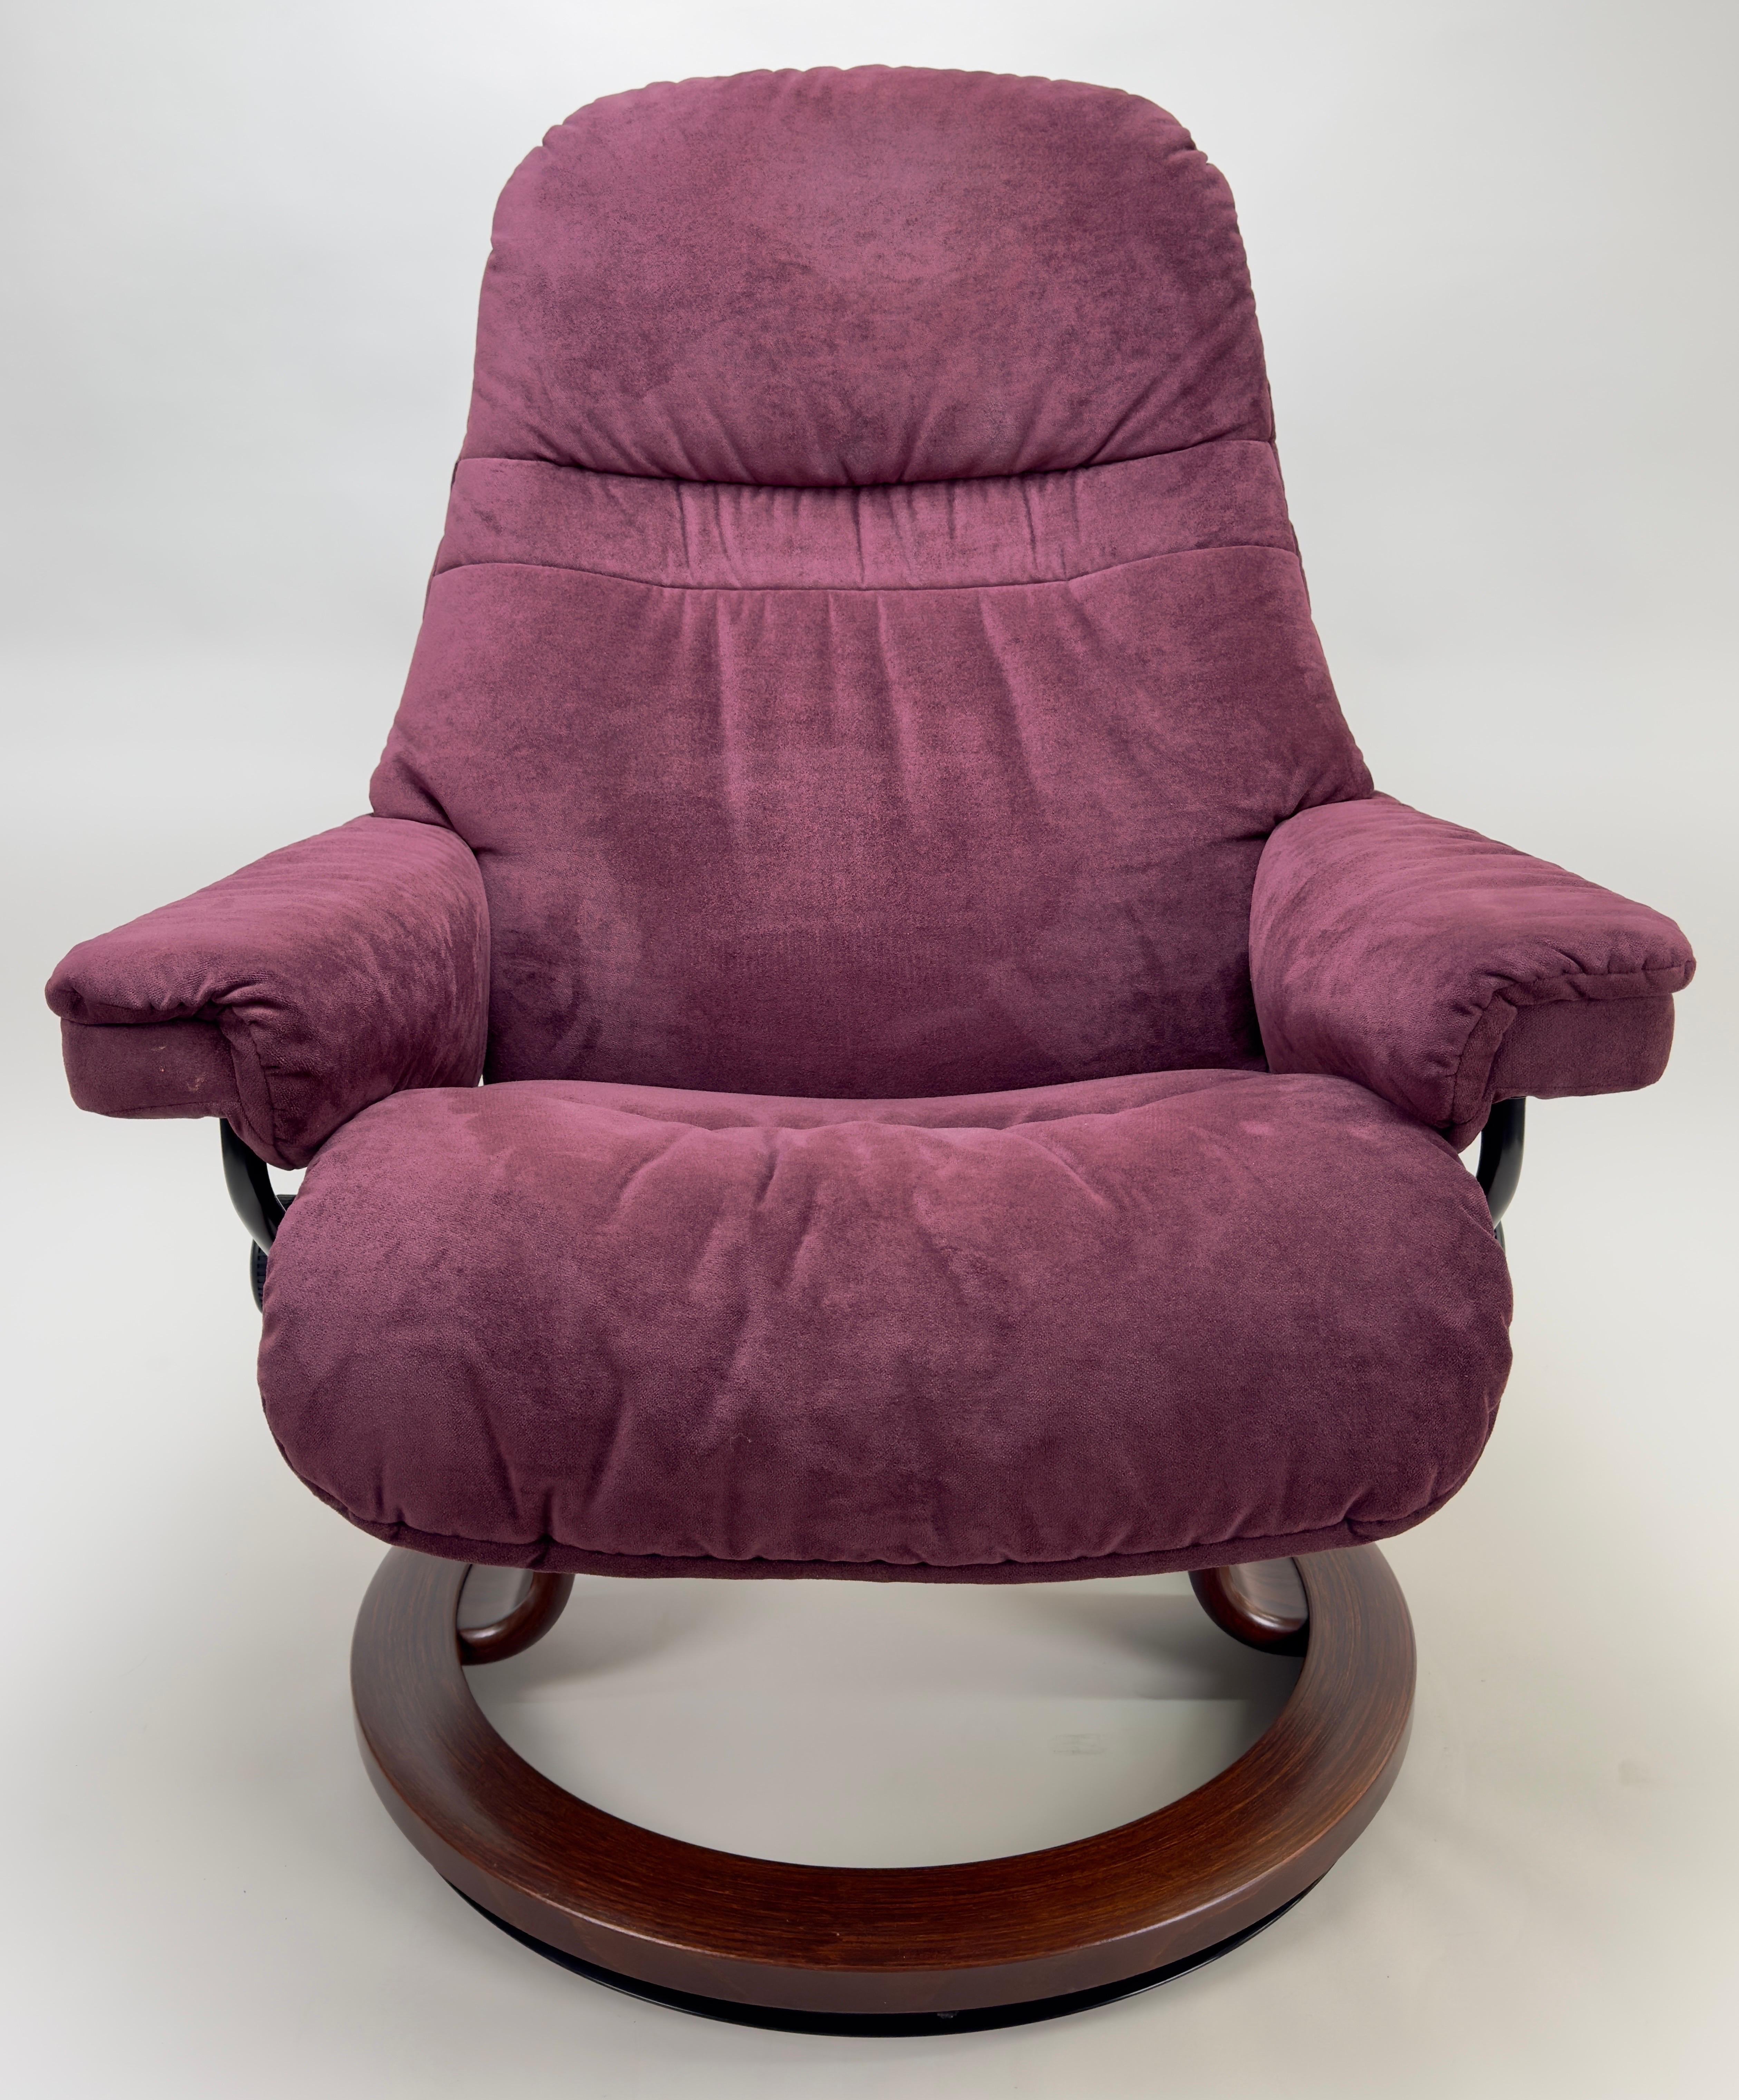 purple chair and ottoman